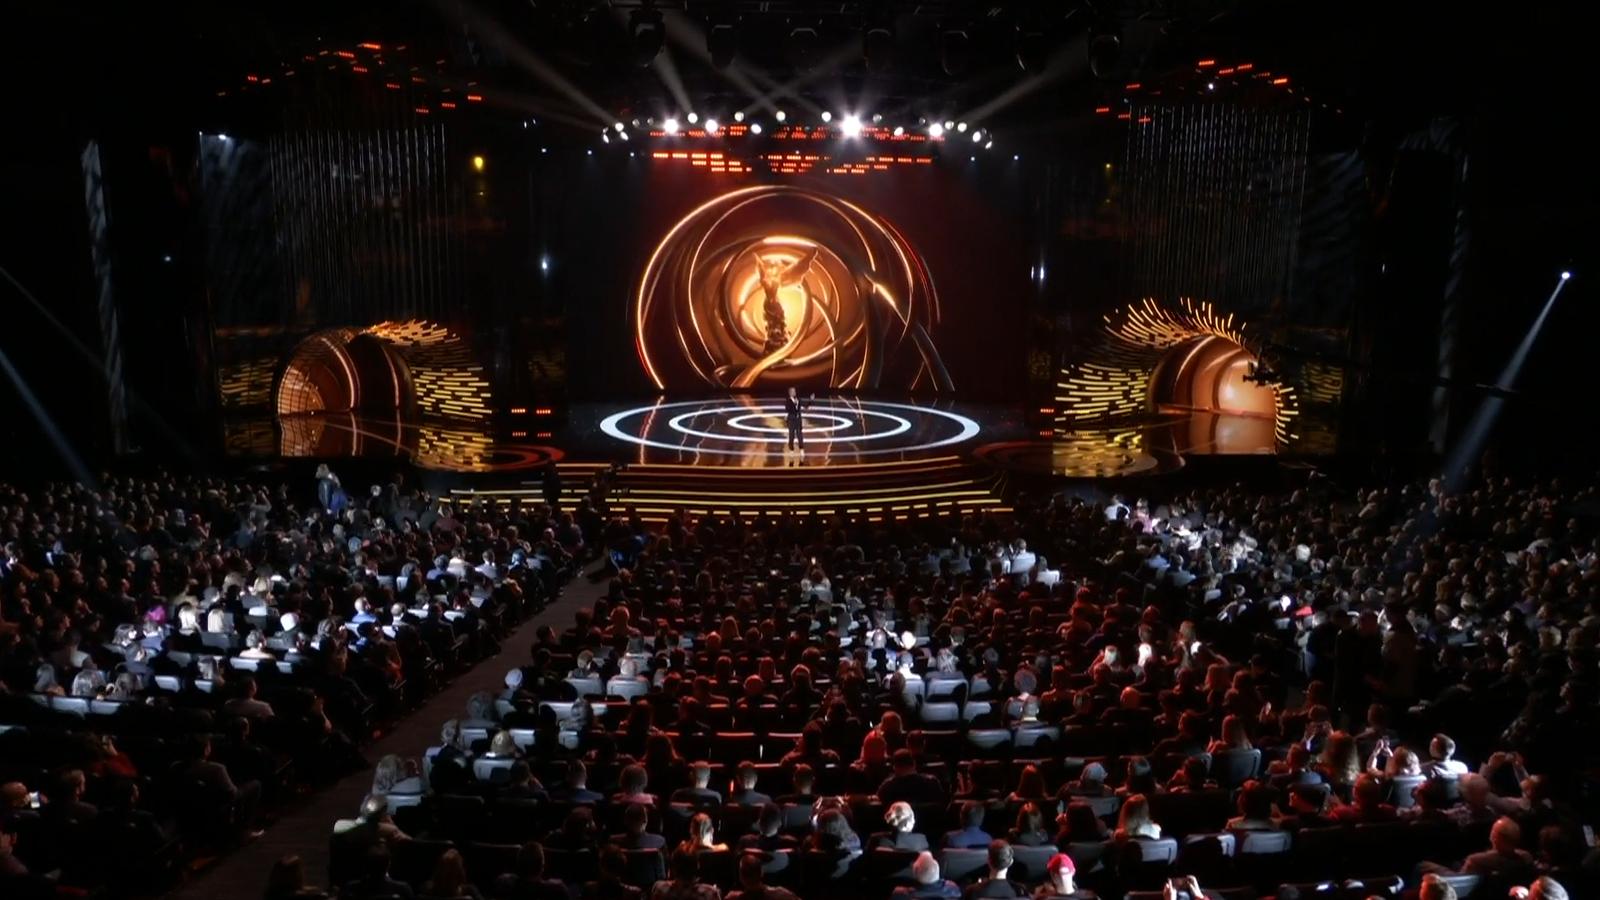 2022 Video Game Awards Season - Tracking and Discussion Thread (New!:  Categories and Genre Winners added) News - Entertainment